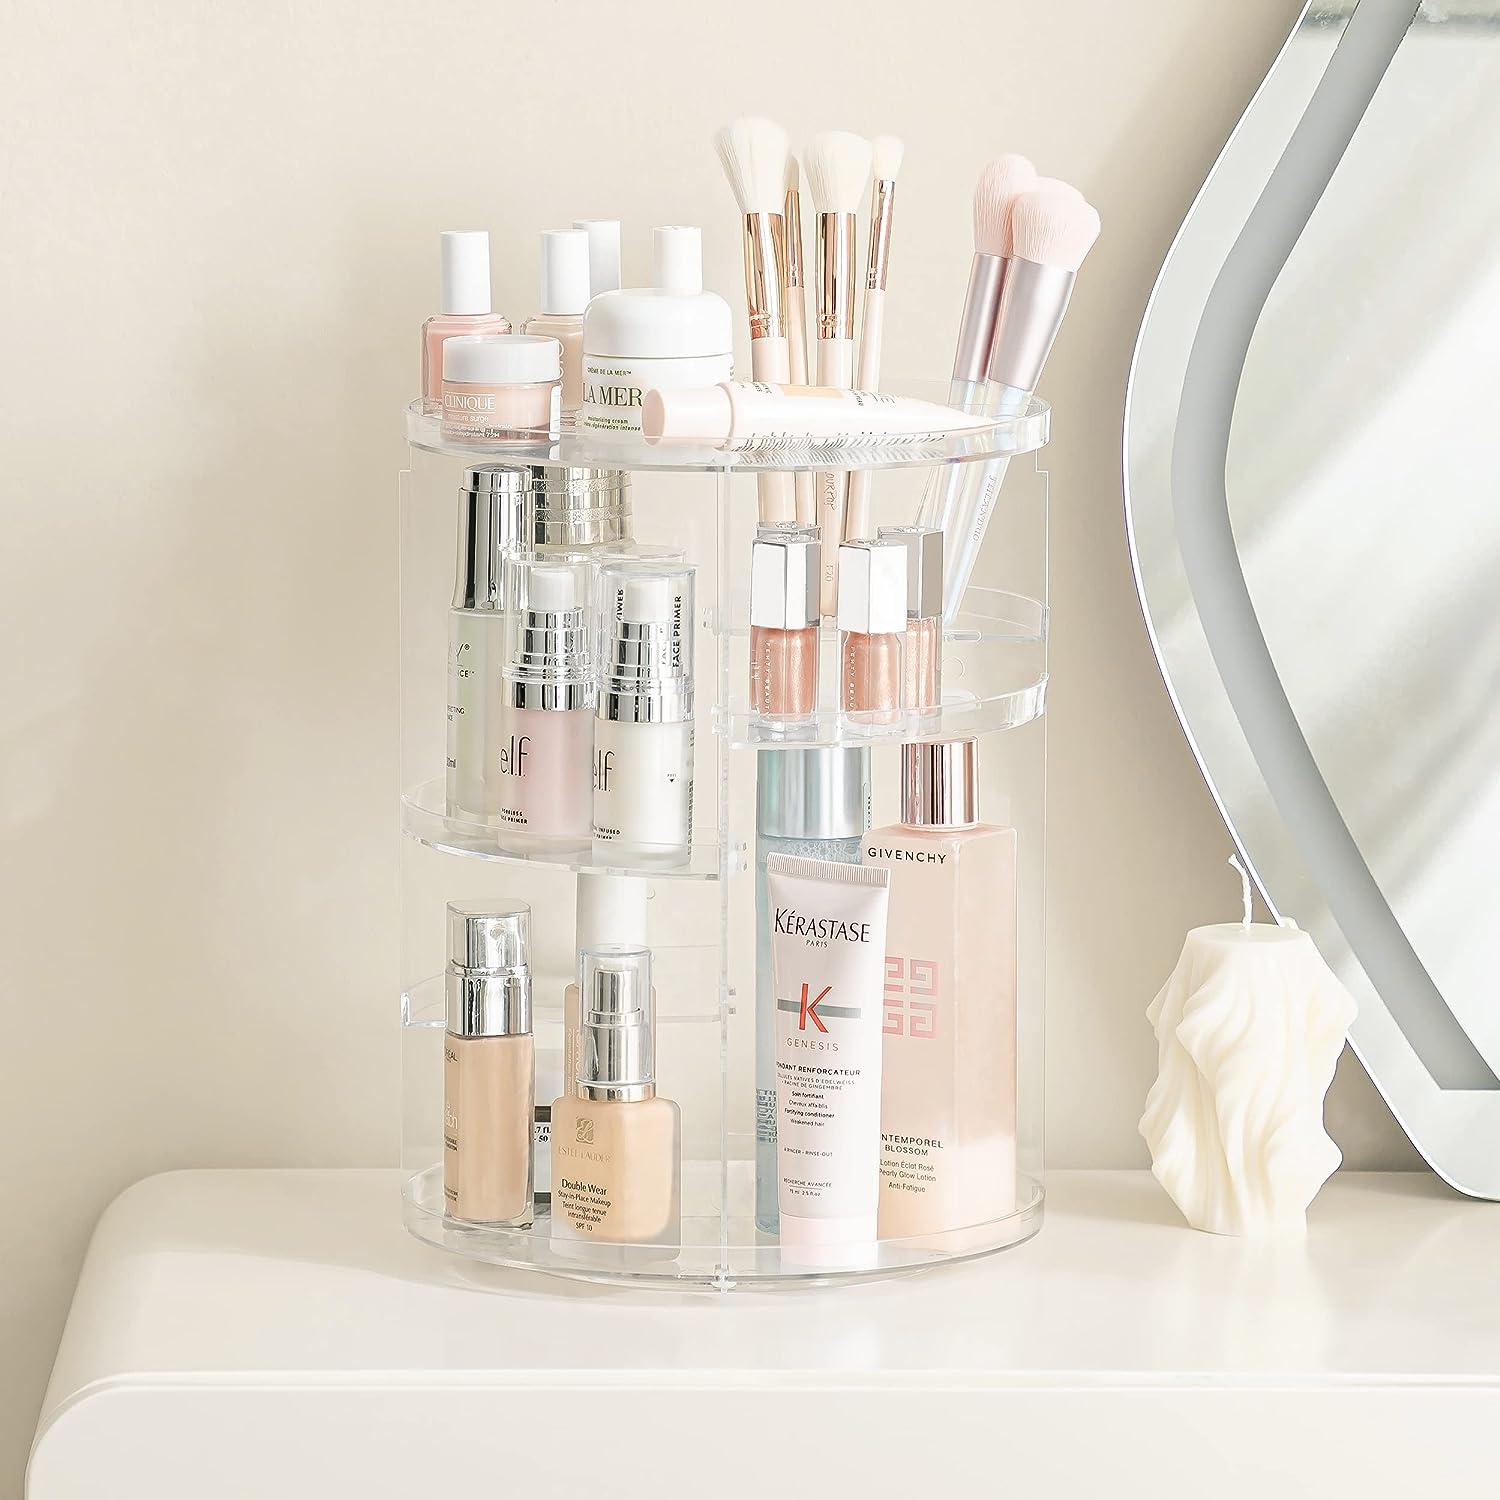 THE] Tips For Organizing Beauty Products – The Home Edit